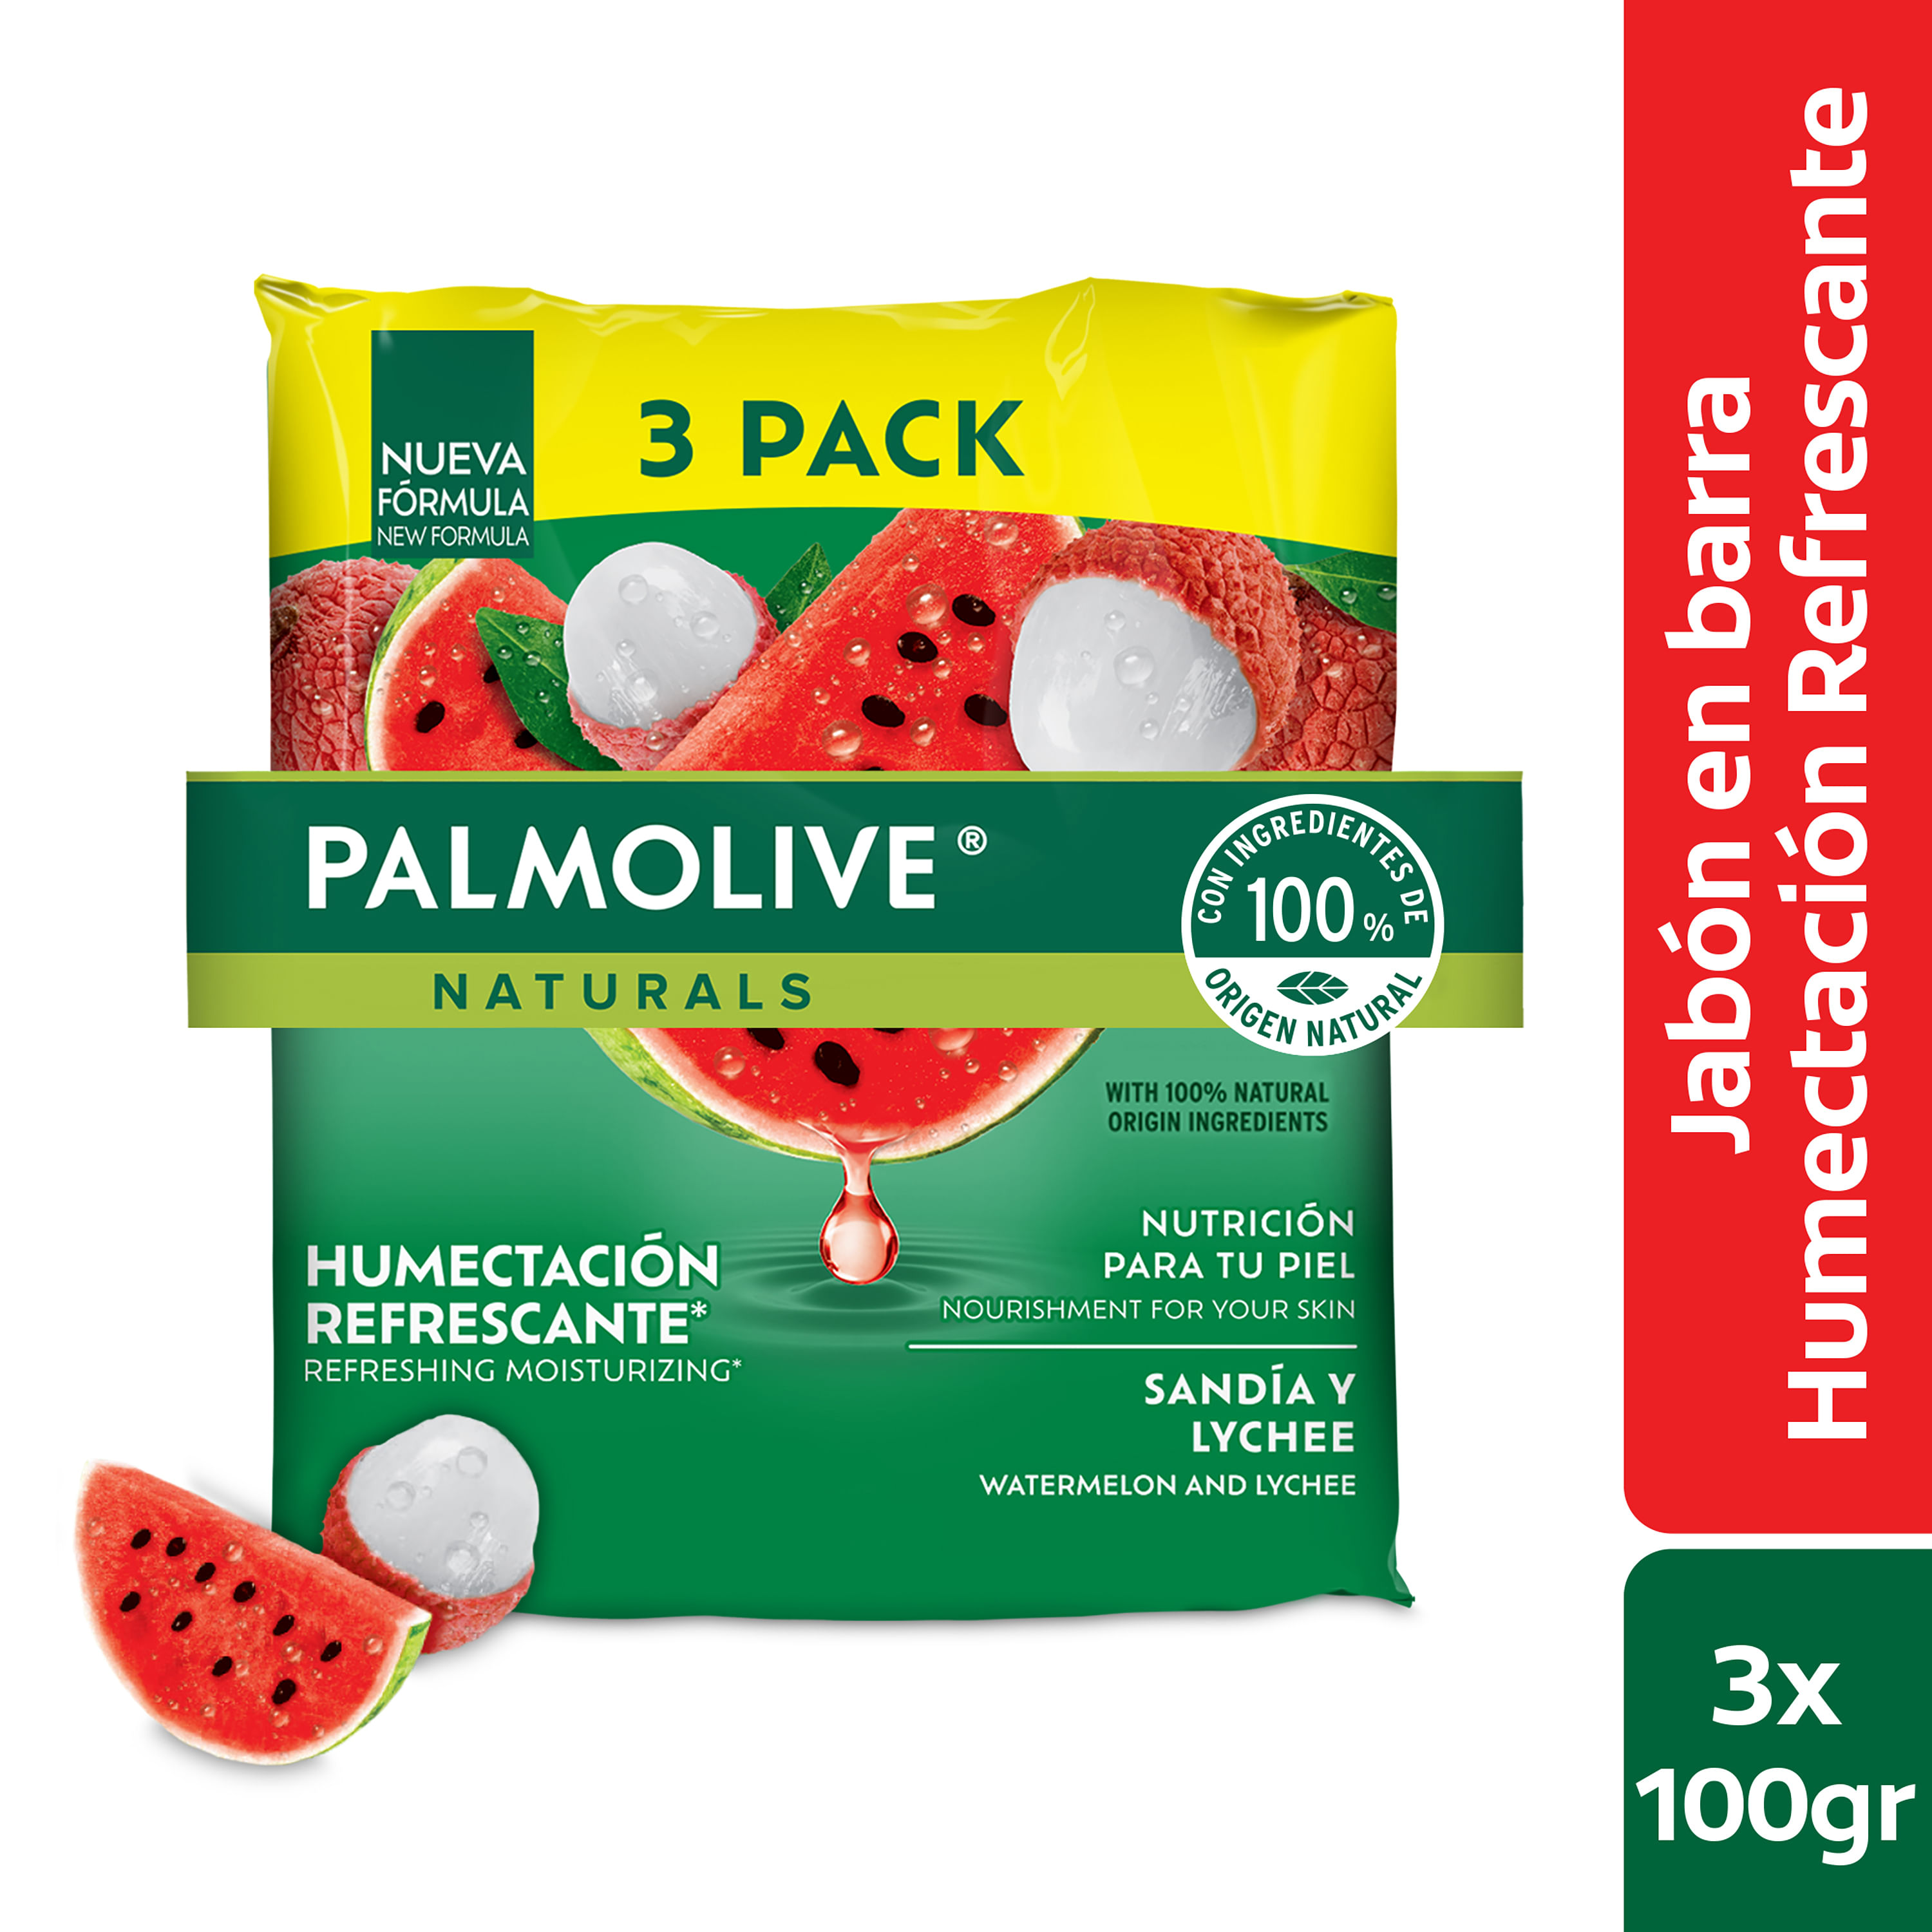 Jabon-Corporal-Palmolive-Naturals-Humectaci-n-Refrescante-Sand-a-y-Lychee-100-g-3-Pack-1-38791